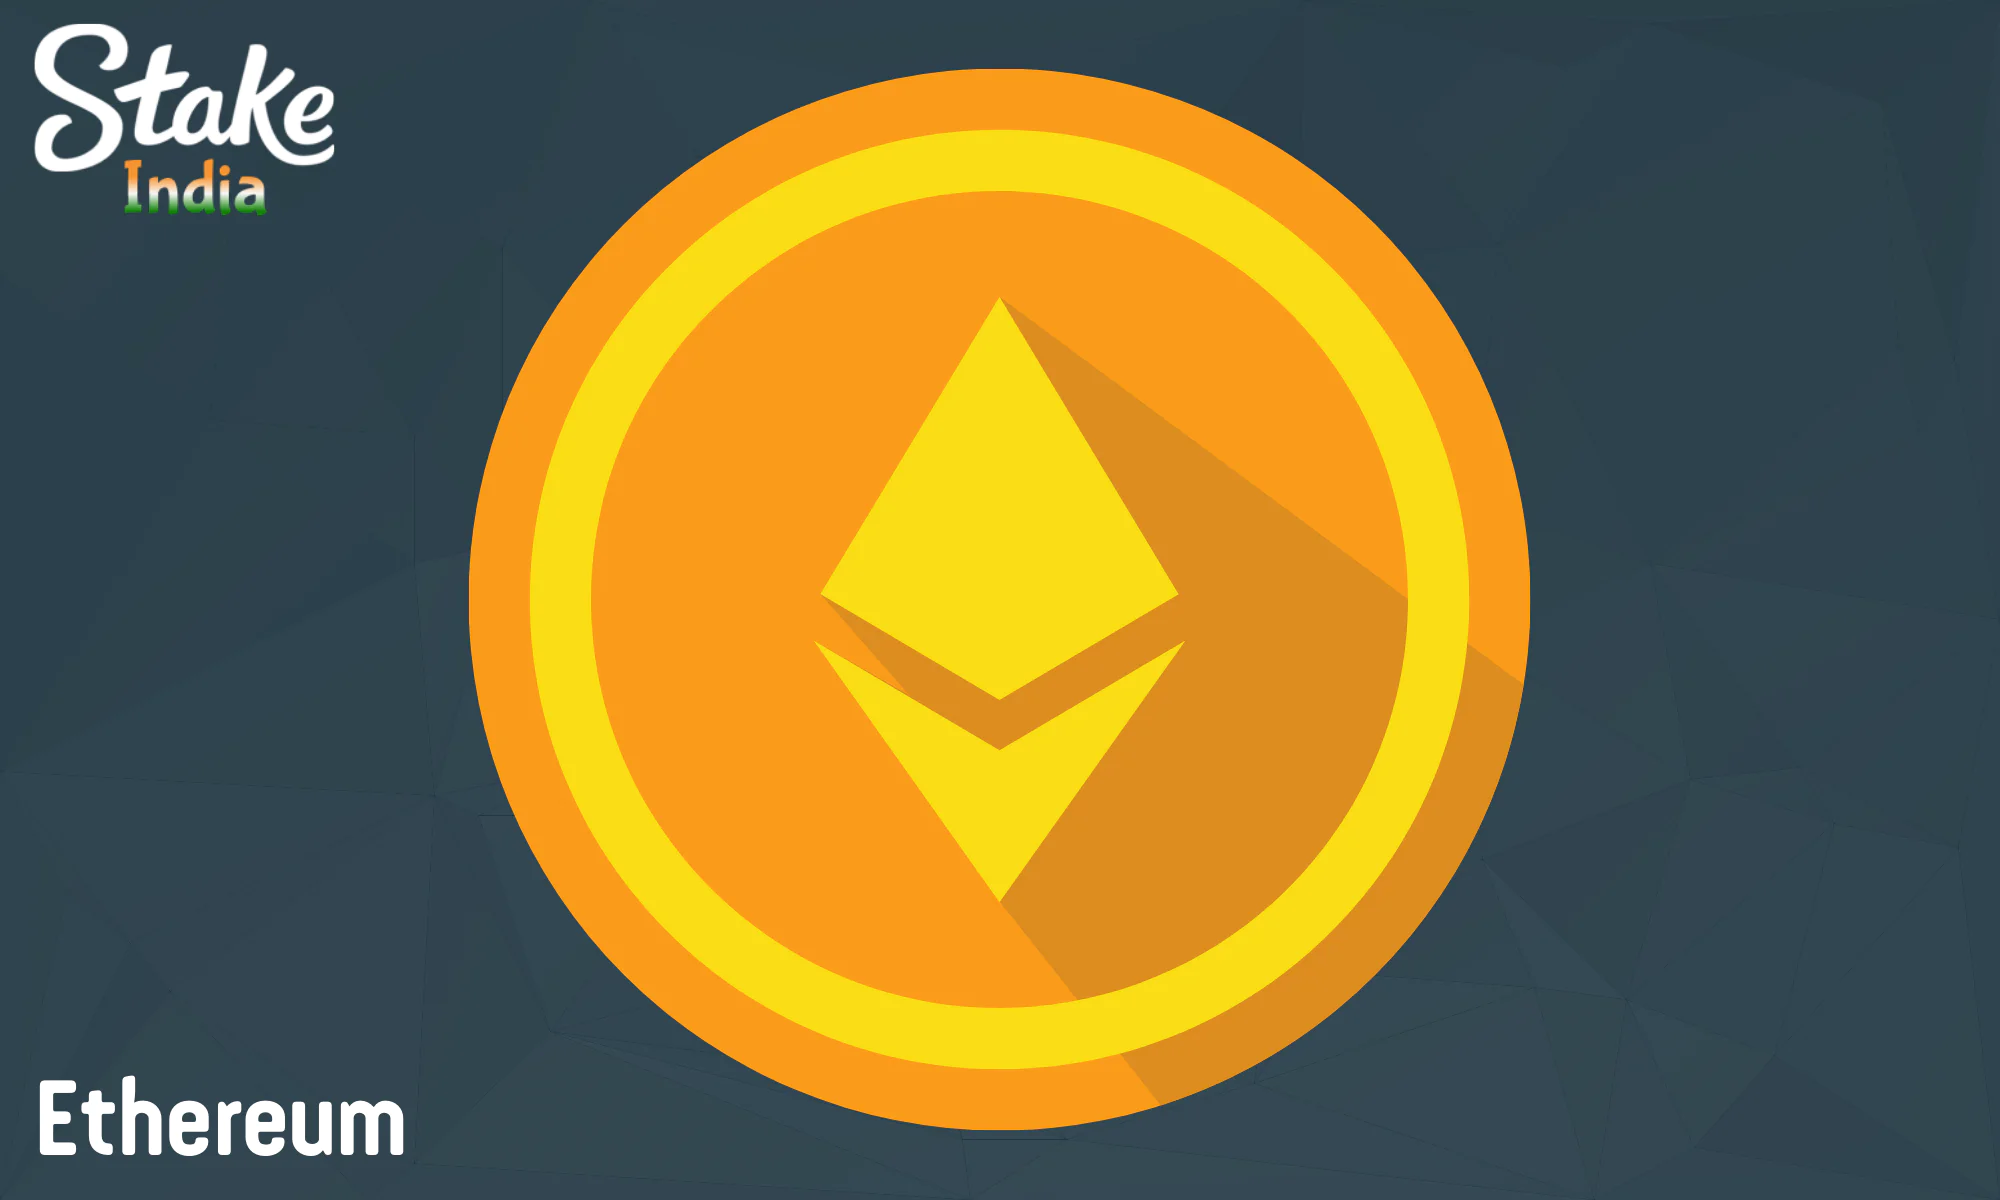 Another popular payment instrument, Ethereum, which is constantly available in Stake